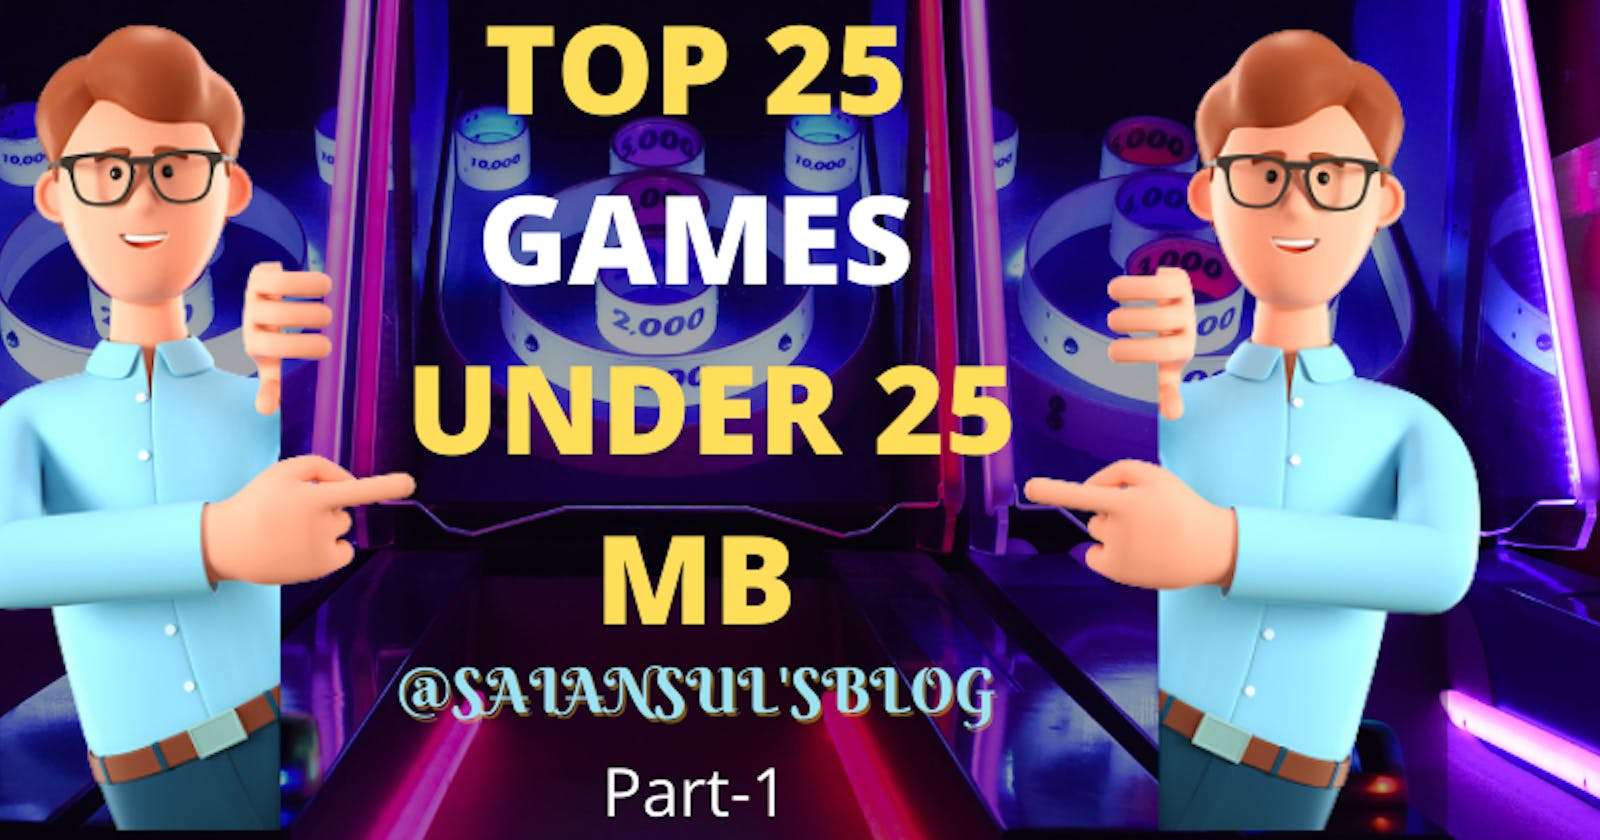 Top 25 Android Games under 25 mb (Part 1)